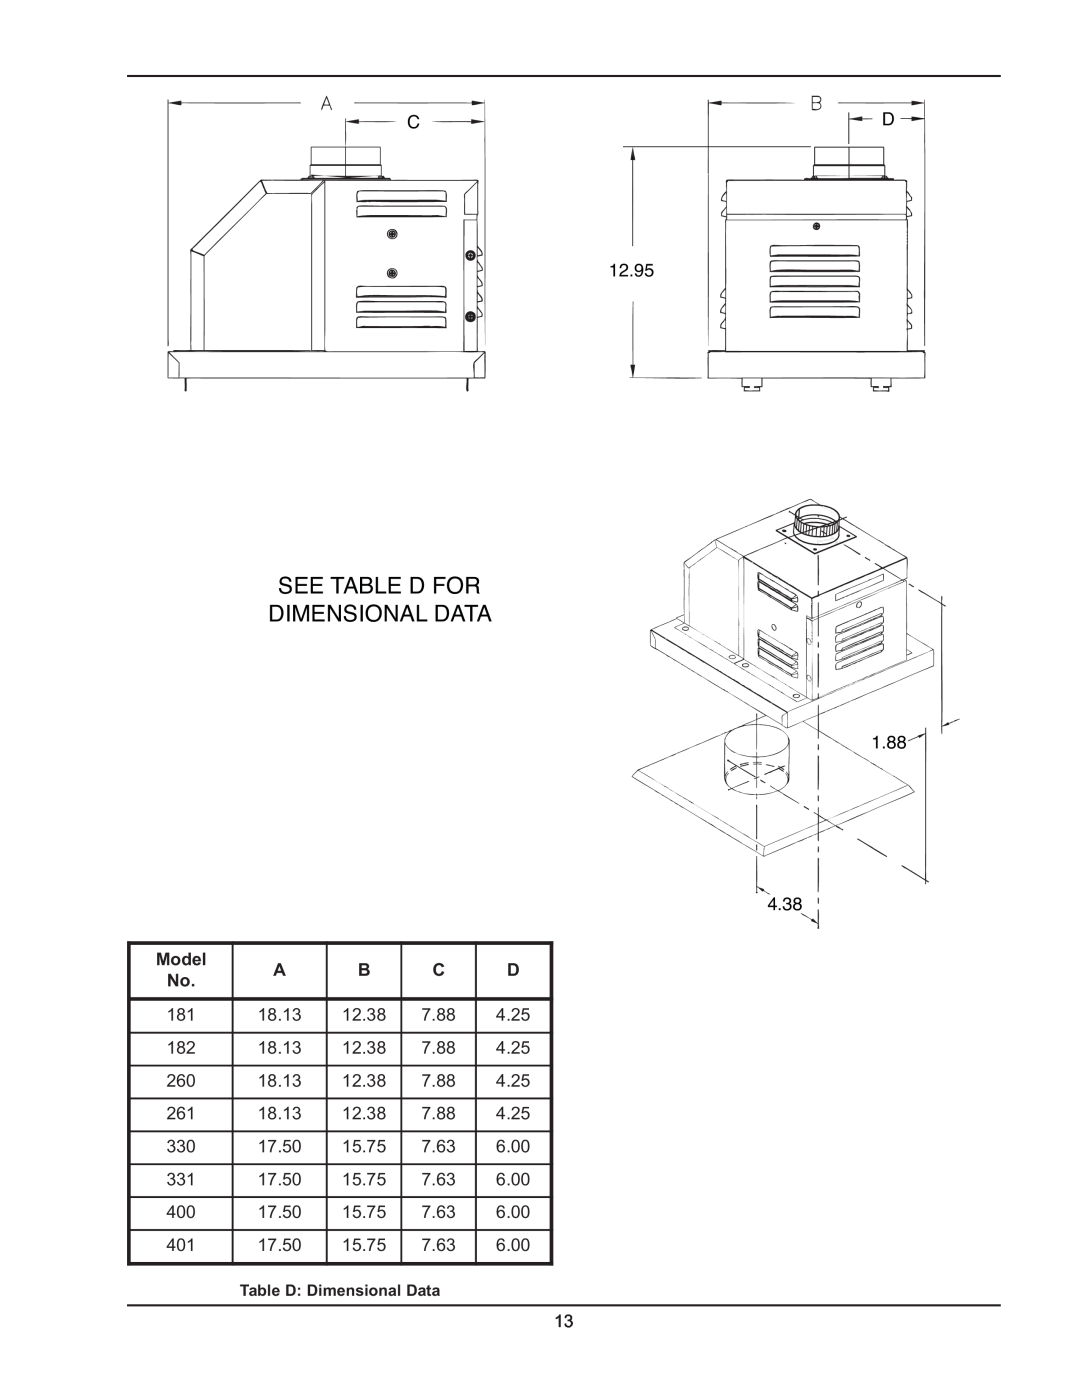 Raypak 181/182, 260/261, 400/401, 330/331 manual See Table D For Dimensional Data, C D, 1.88 